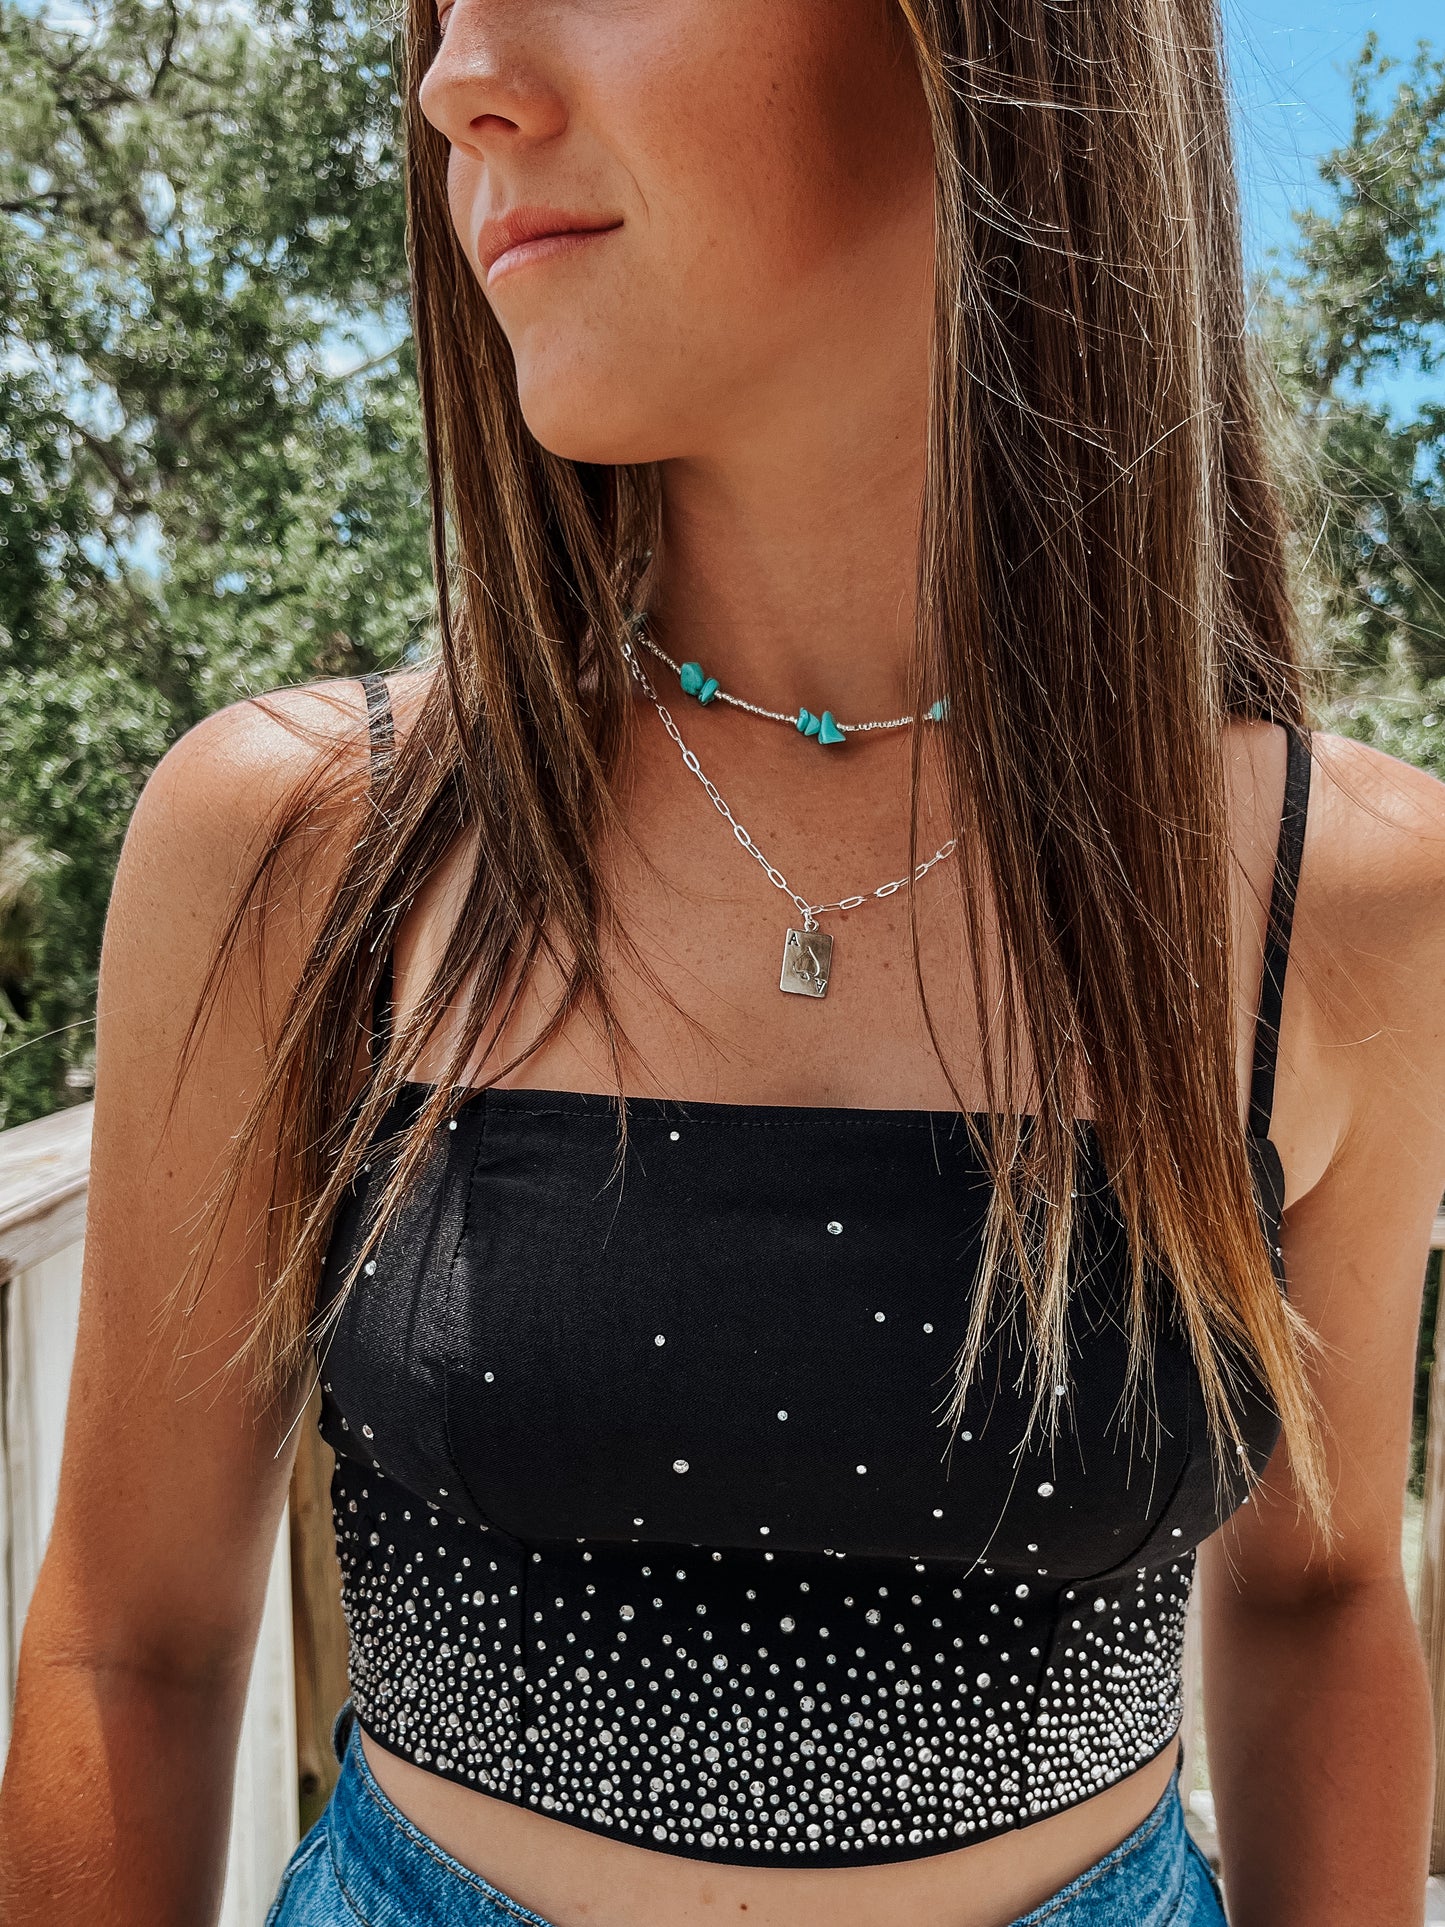 The Turquoise and Beads Choker